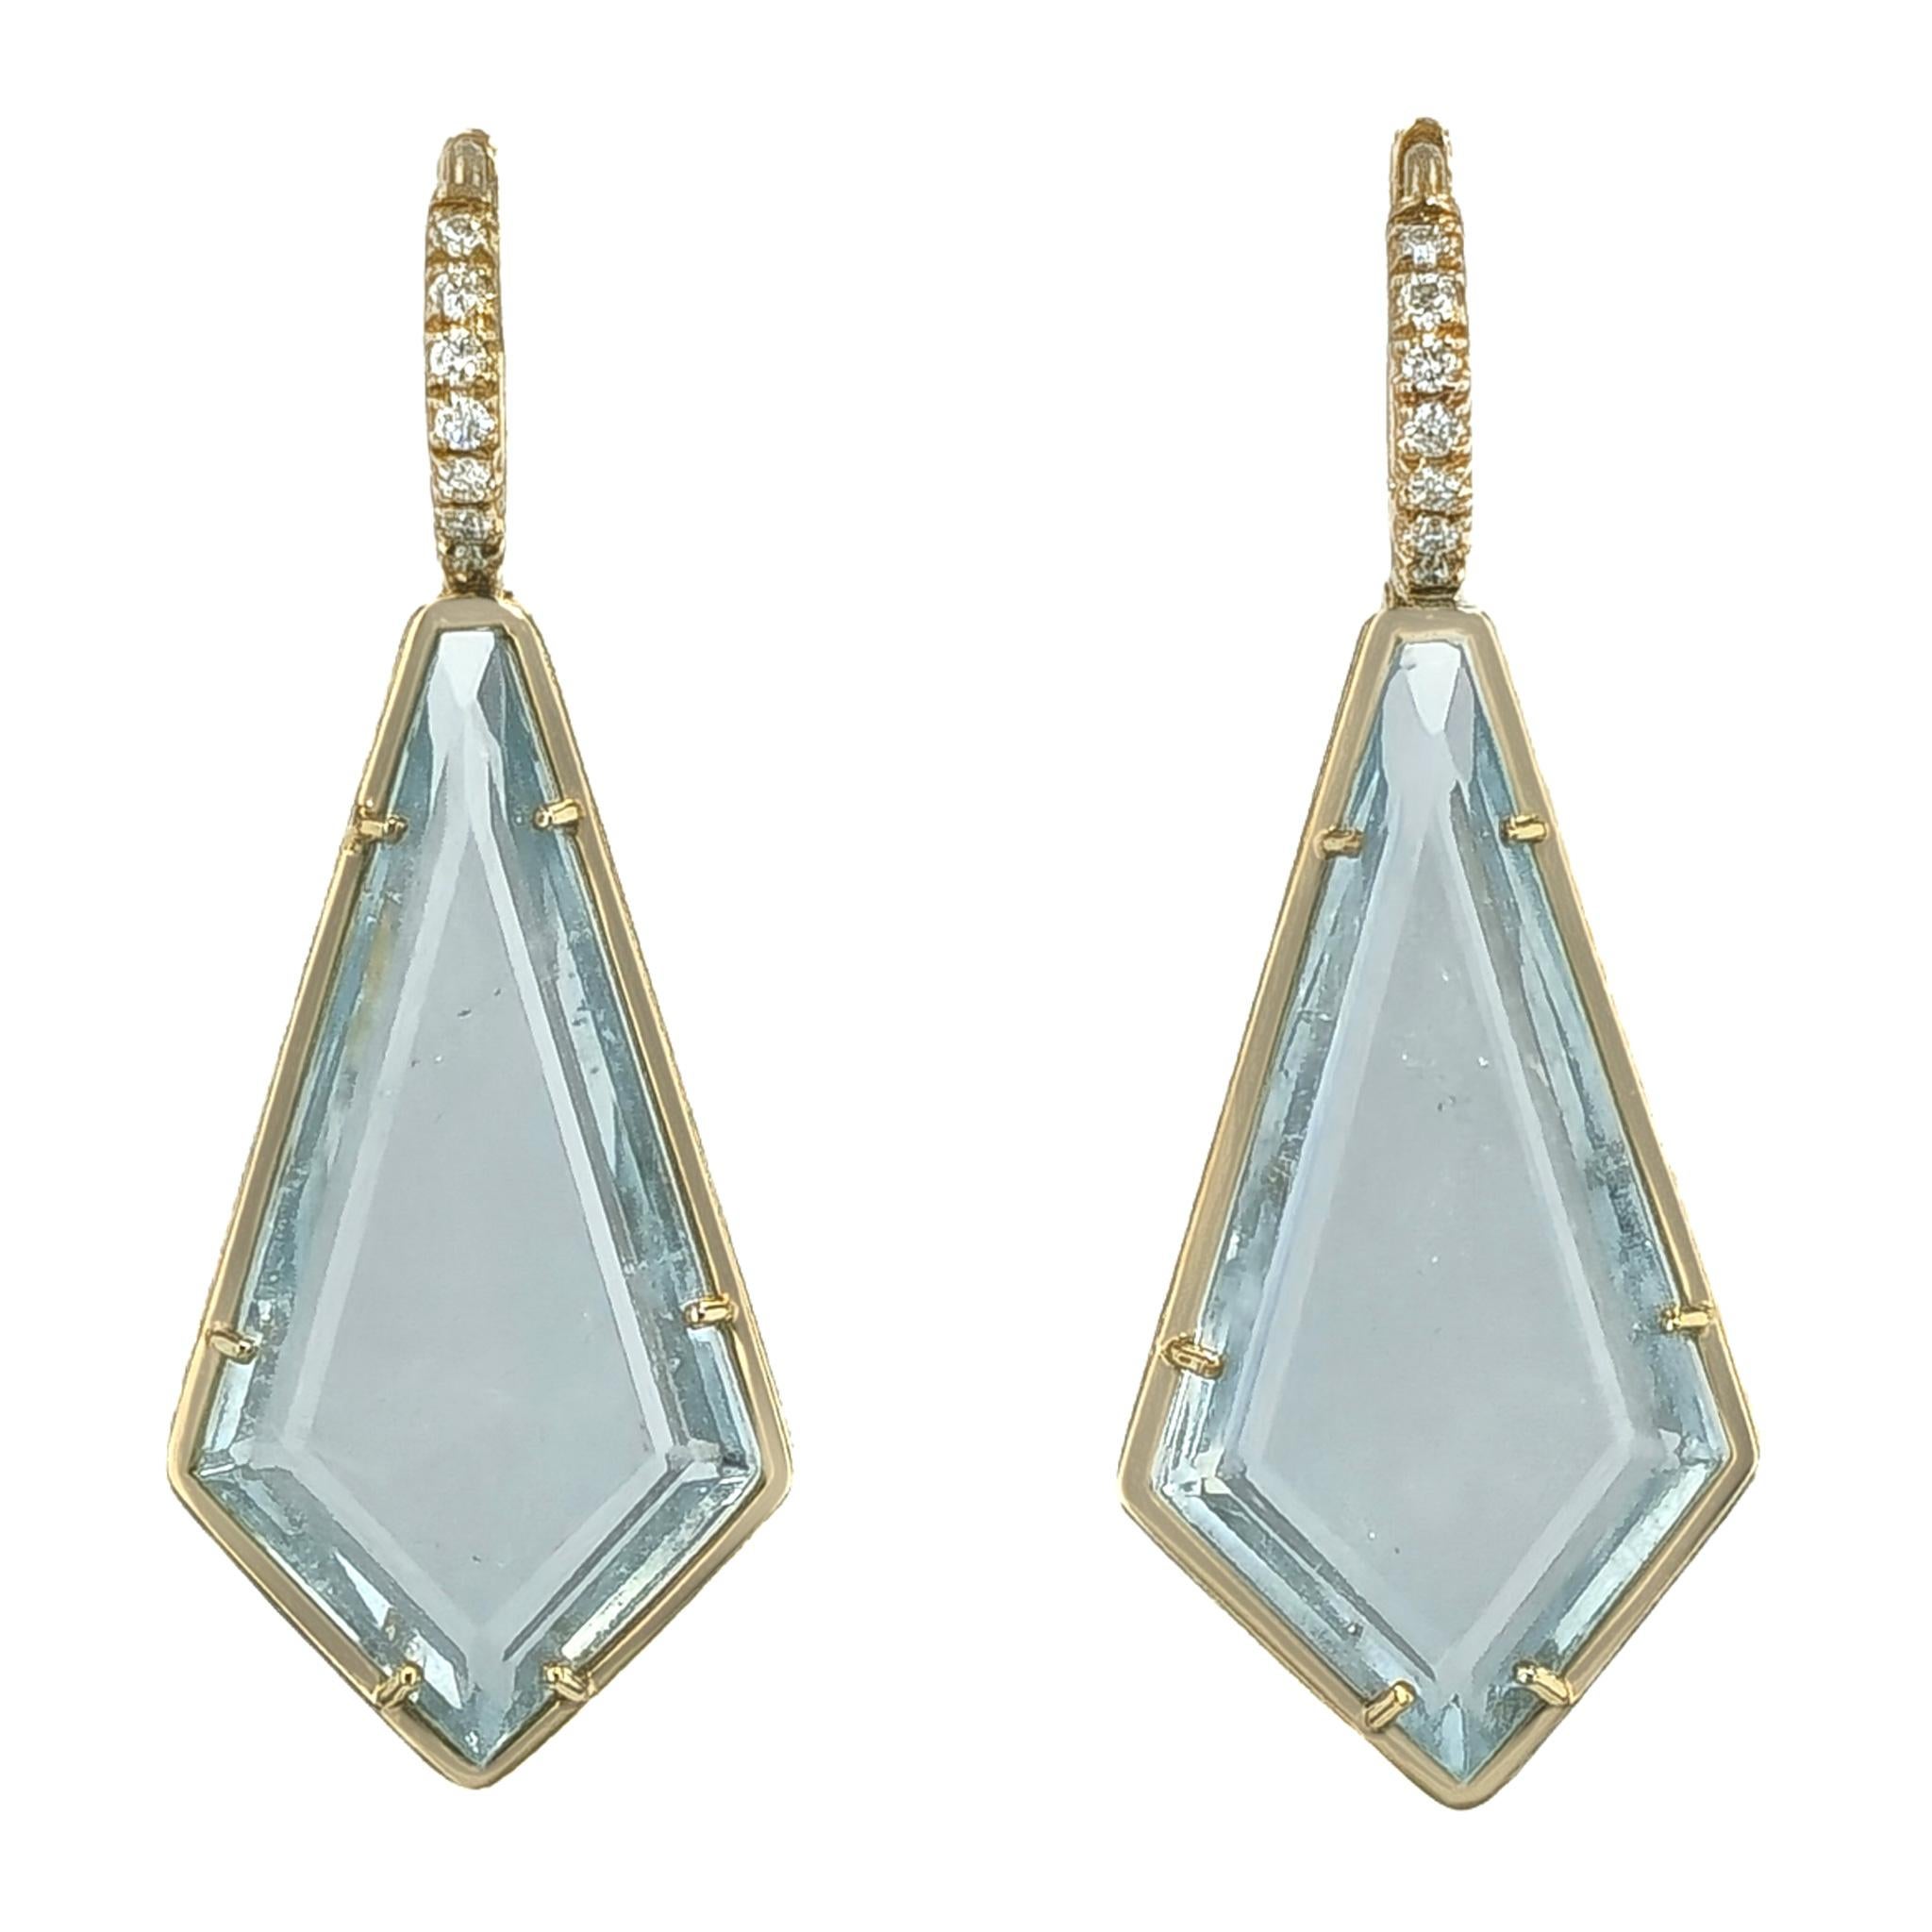 These exquisitely handcrafted drop earrings feature a total of 18.80 carats of table cut kite blue topaz set in 18 karat yellow gold. 
There is an additional 14 pieces of 0.10 total carats of F/G VS1 diamonds set in pave. 

These elegant earrings